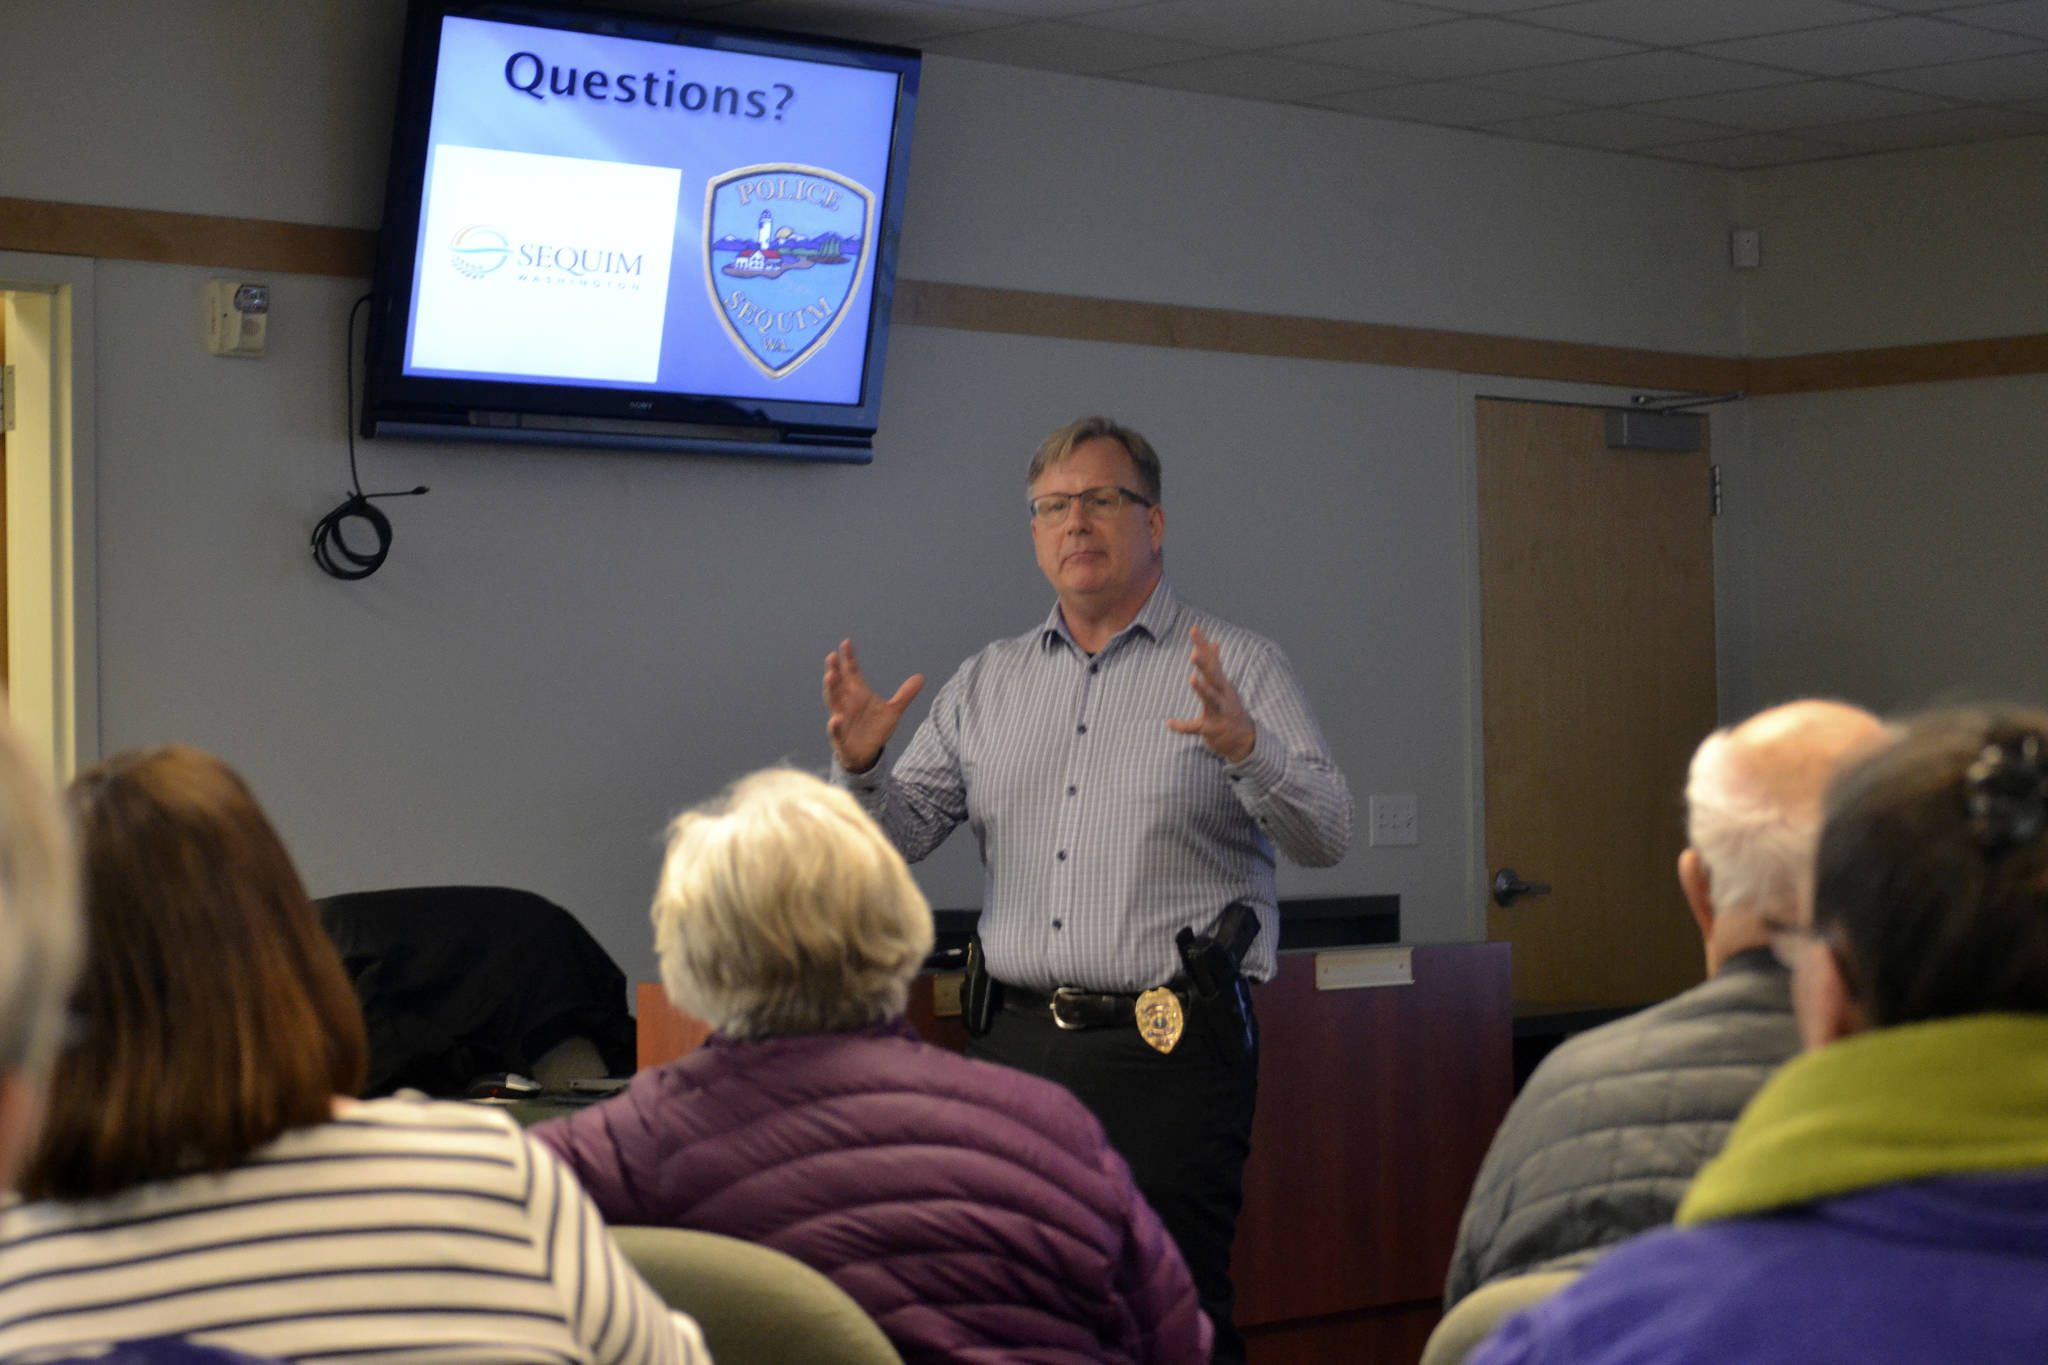 Sequim Police Detective Sgt. Darrell Nelson leads a meeting on March 29 in the Sequim Transit Center about re-establishing the Neighborhood Watch program across the city. (Matthew Nash/Olympic Peninsula News Group)